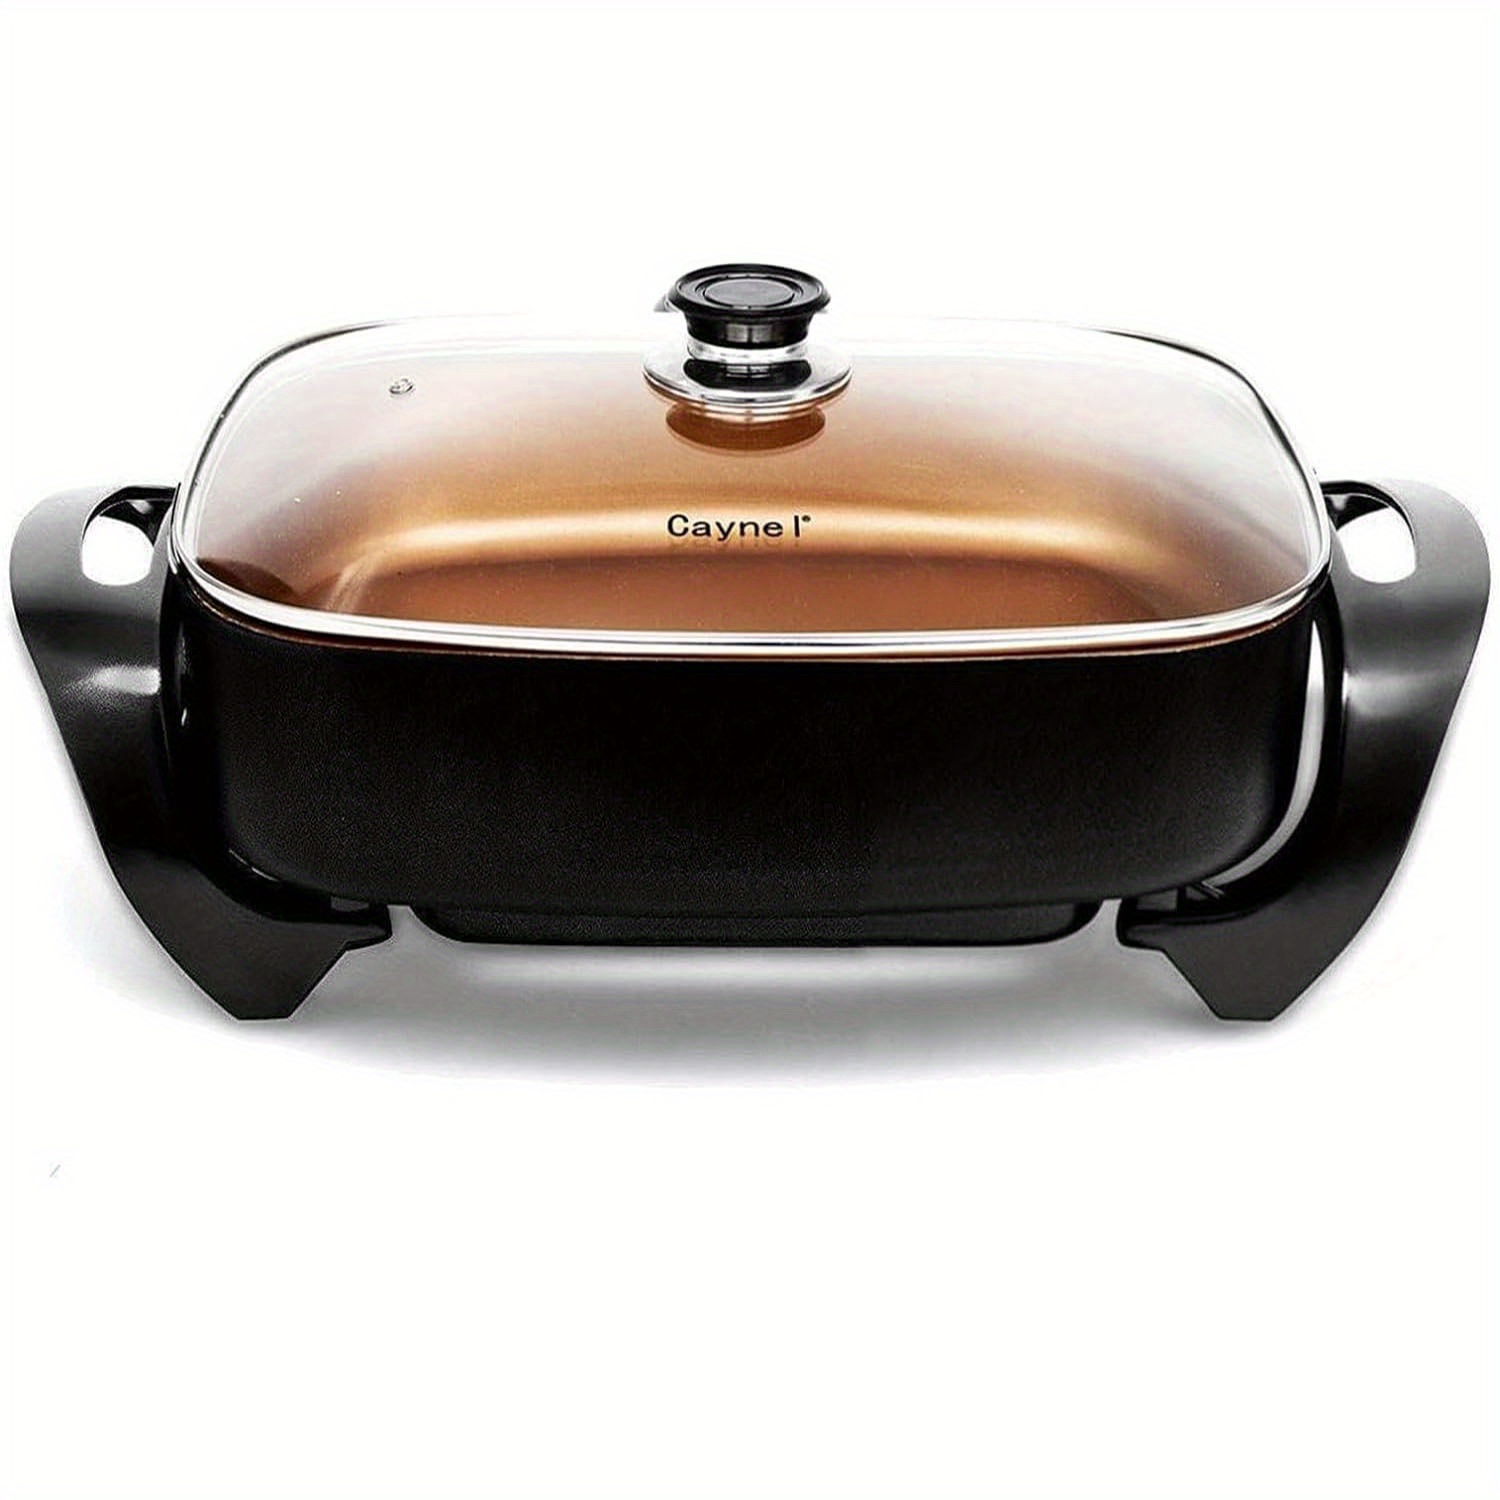 

1pc, Professional Non-stick Copper Electric Skillet Jumbo, With Tempered Glass Vented Lid, Upgrade Thermostat, 16''x 12''x 3.15''- 8 Quart